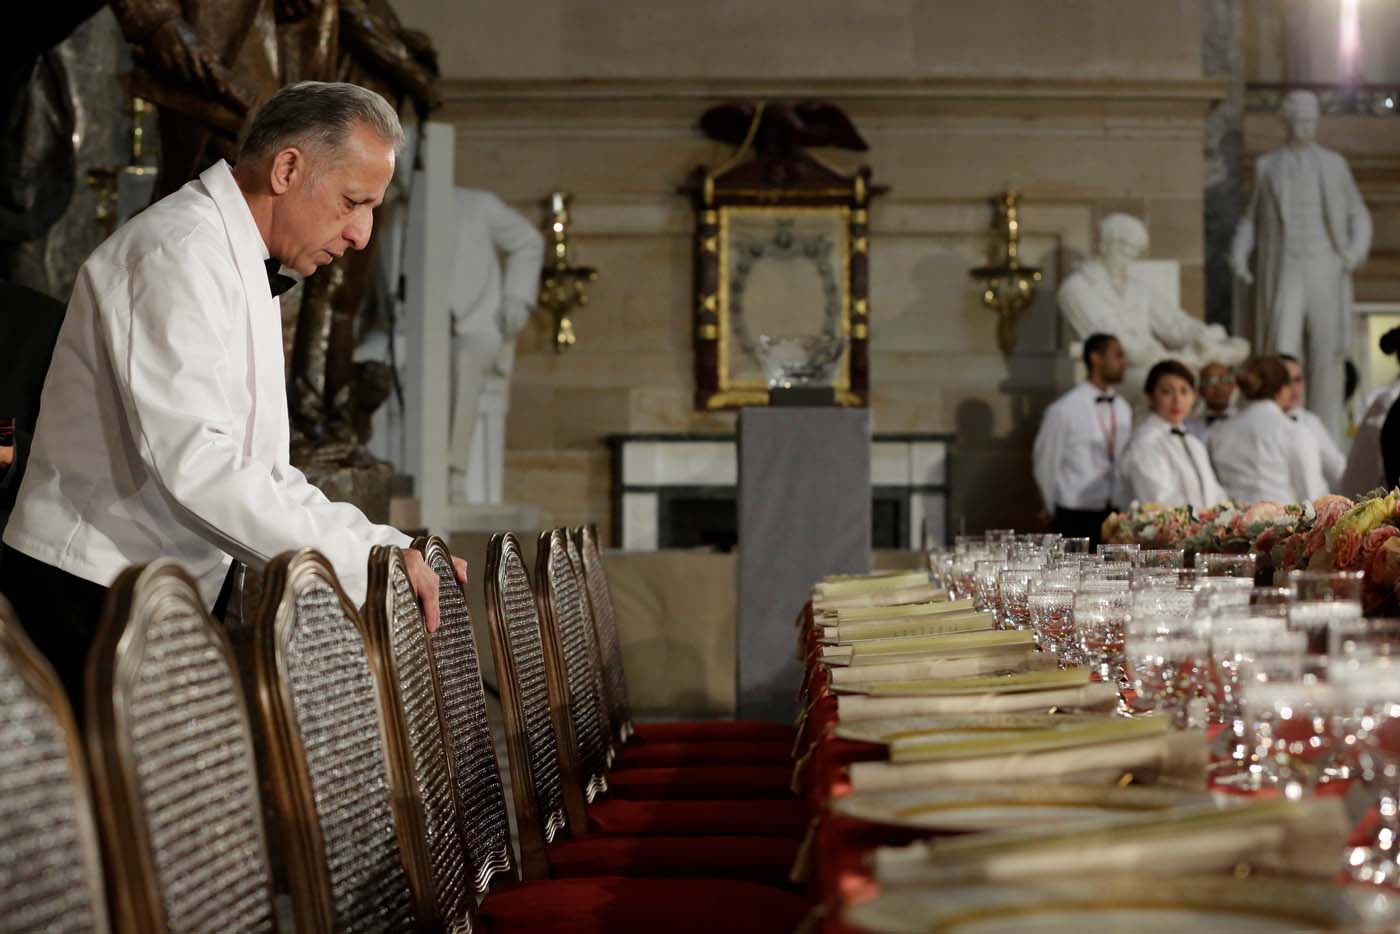 A Head Waiter Makes Final Checks Of A Table Prepared For U S President Donald Trump And Members Of Congress Before The Inaugural Luncheon In Statuary Hall On Capitol Hill In Washington,Kings Landing City Croatia